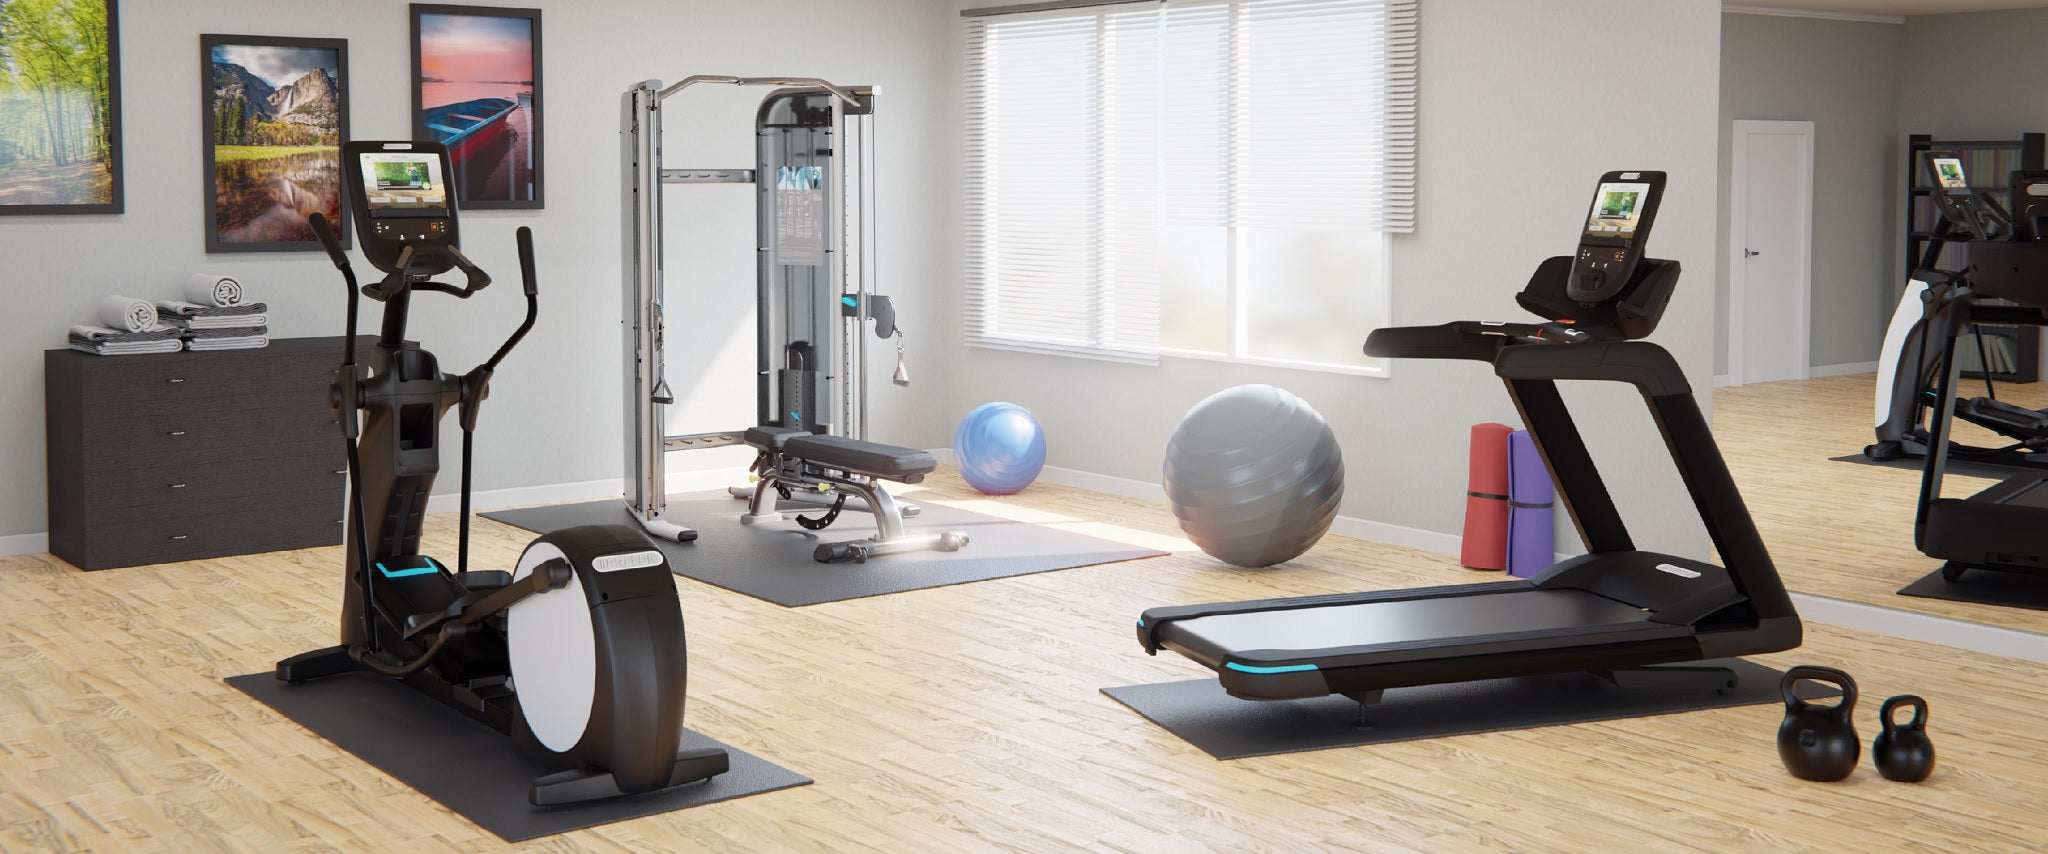 California Home Fitness - Fitness Equipment Superstore